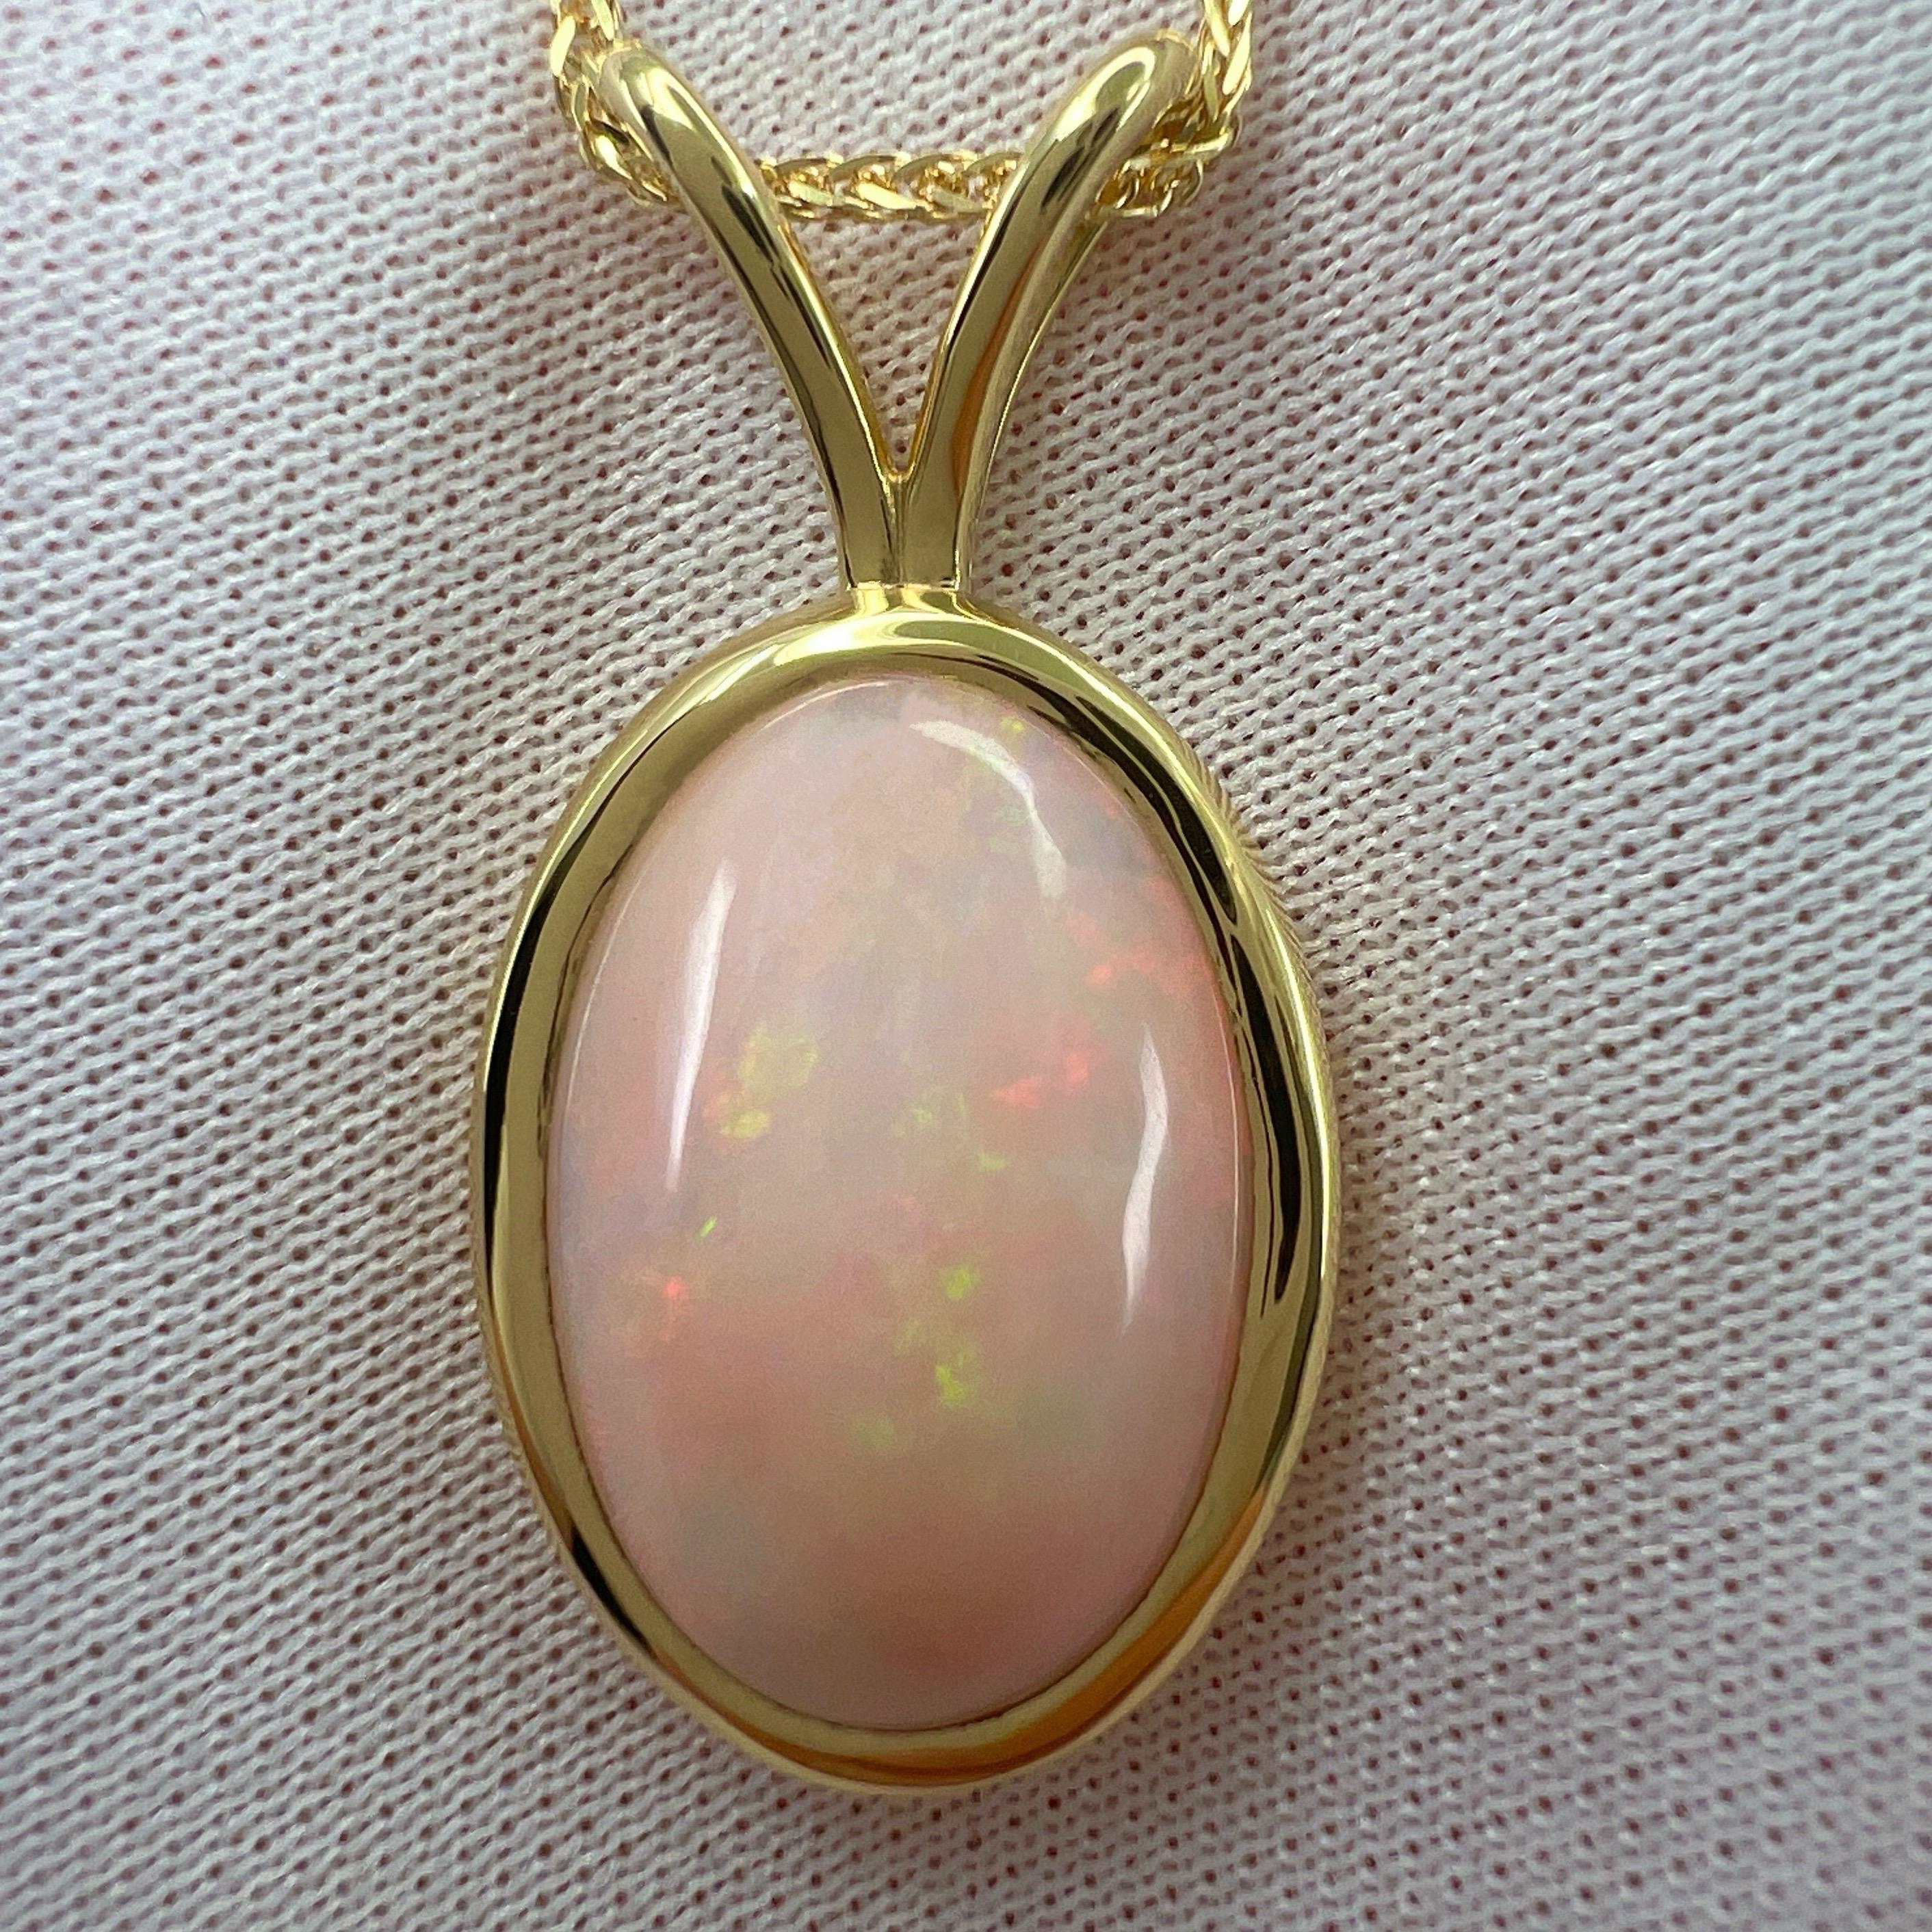 6.15ct Fine White Opal Oval Cabochon 18k Yellow Gold Bezel Pendant Necklace For Sale 4